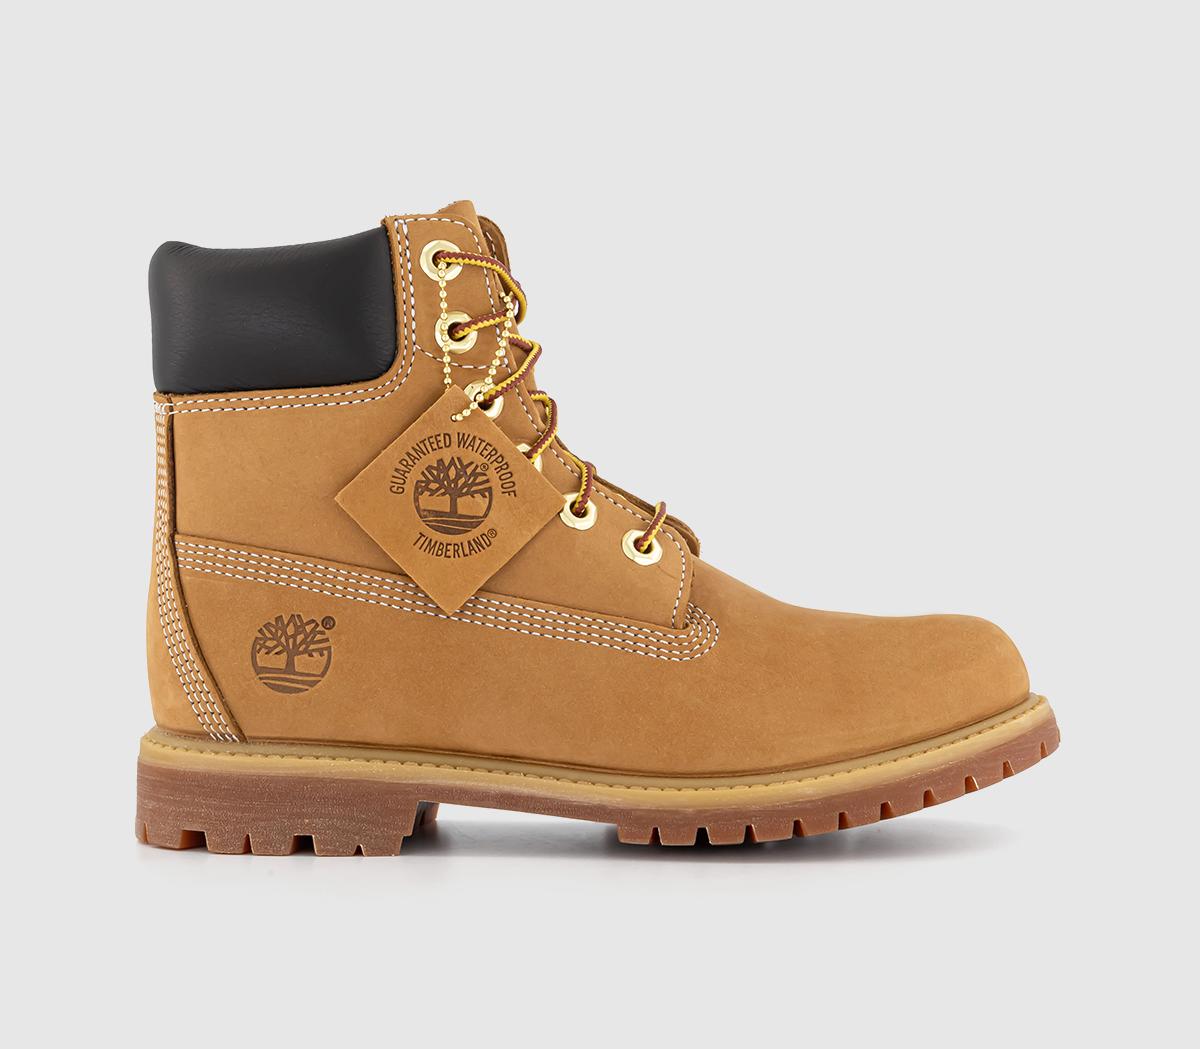 Timberland Premium 6 Boots F Wheat Nubuck - Women's Ankle Boots